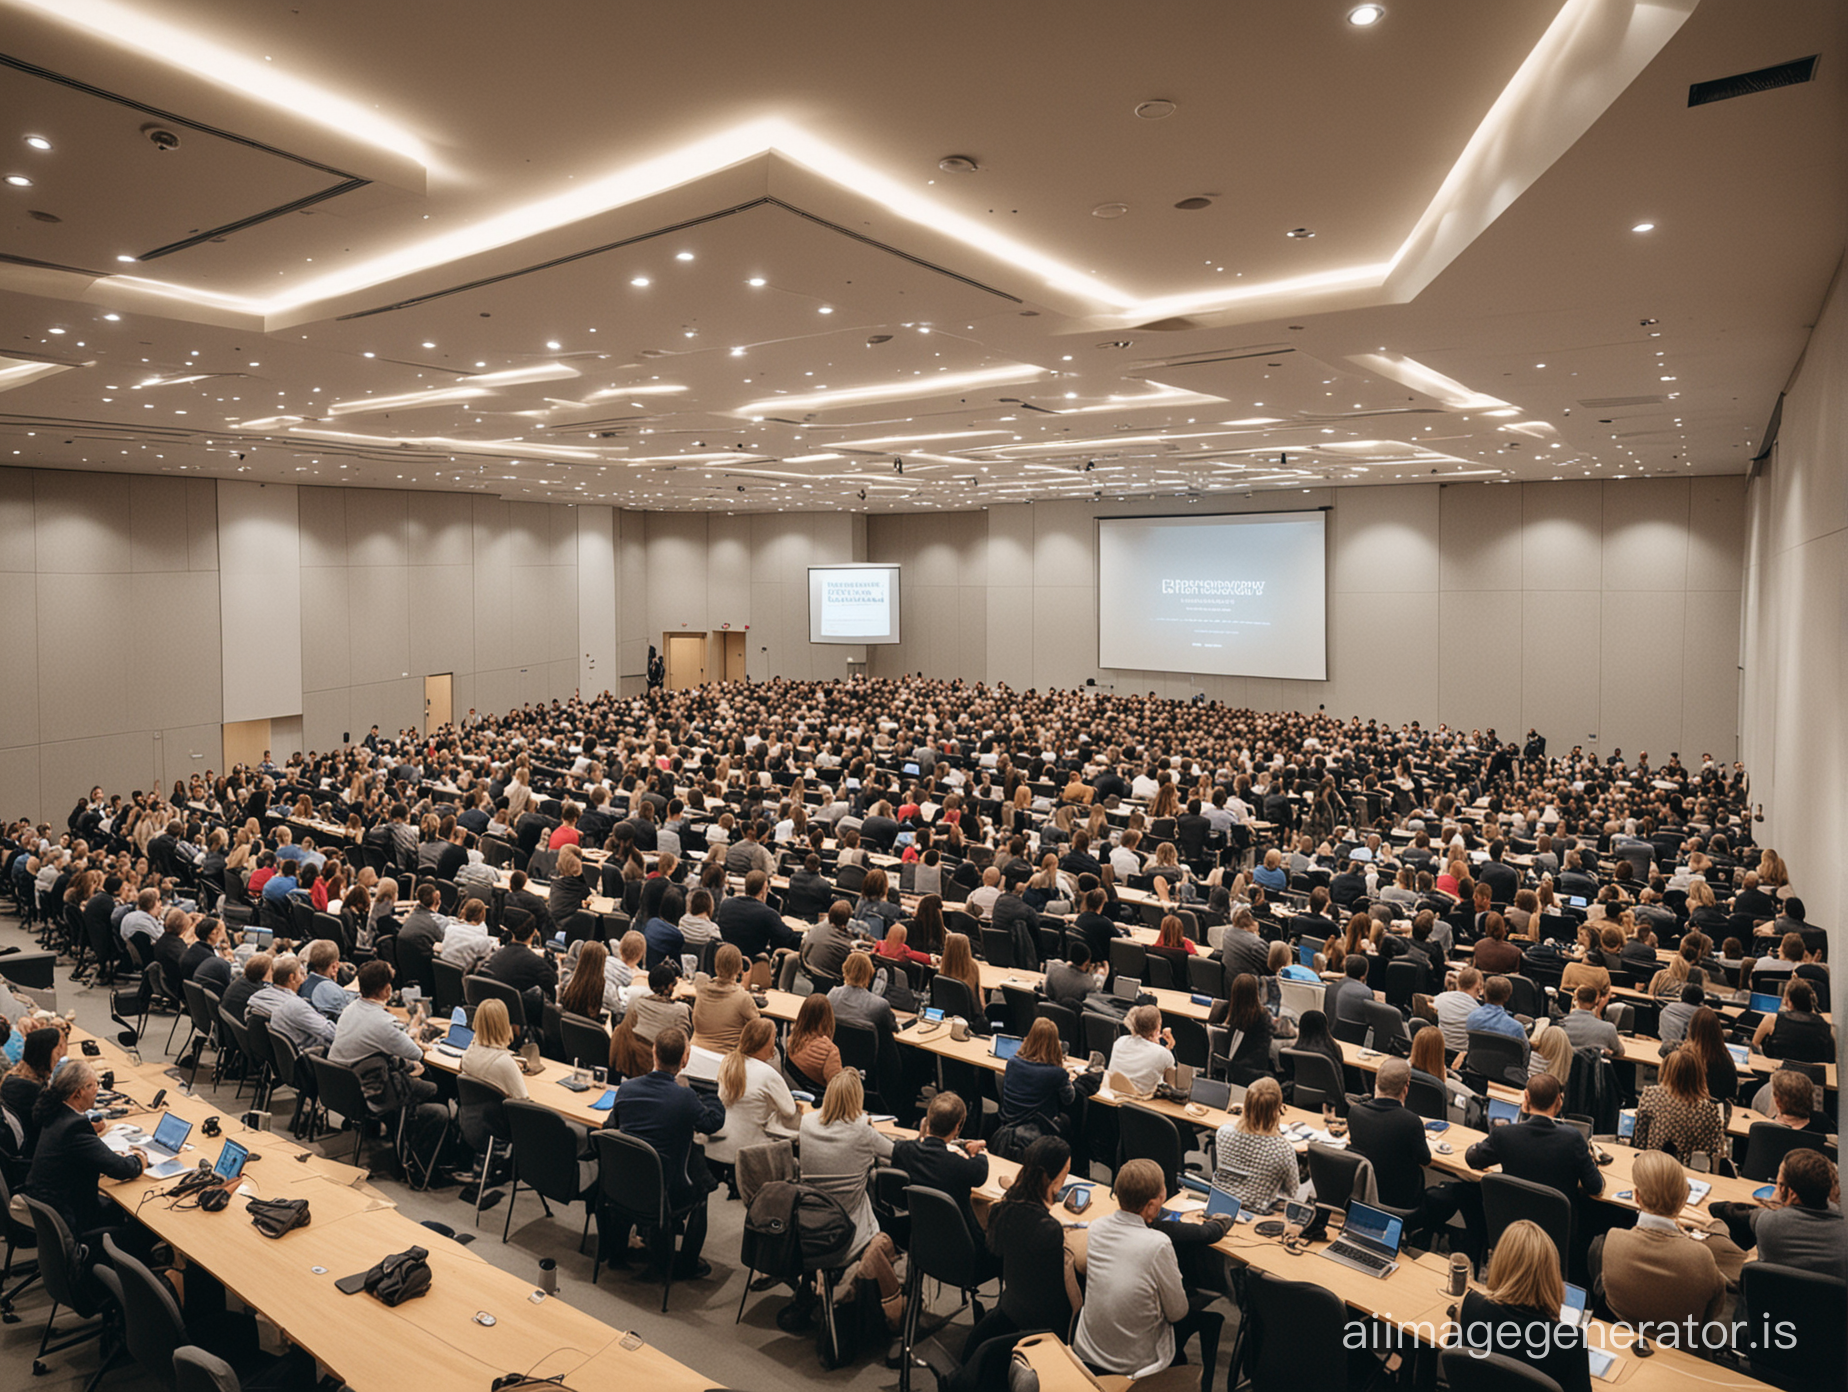 An audience of around 400 people, sitting in a modern conference room